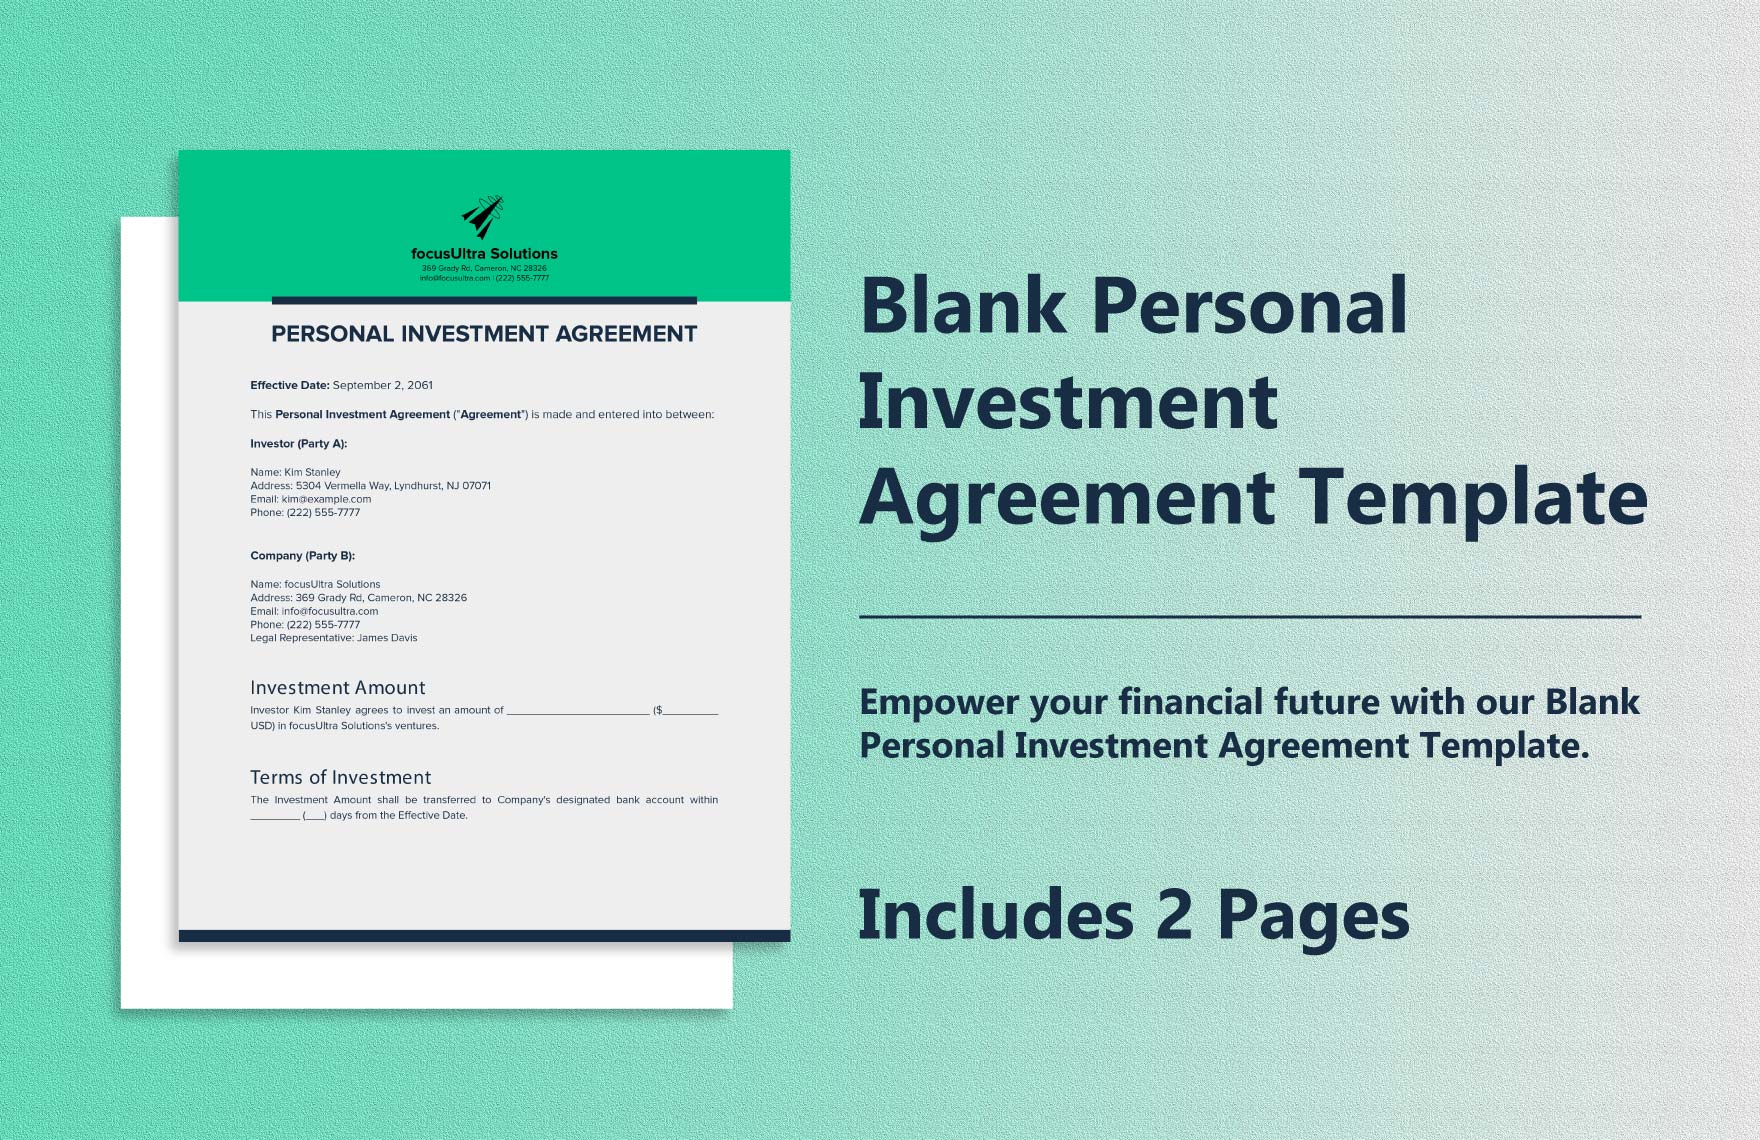 Blank Personal Investment Agreement Template